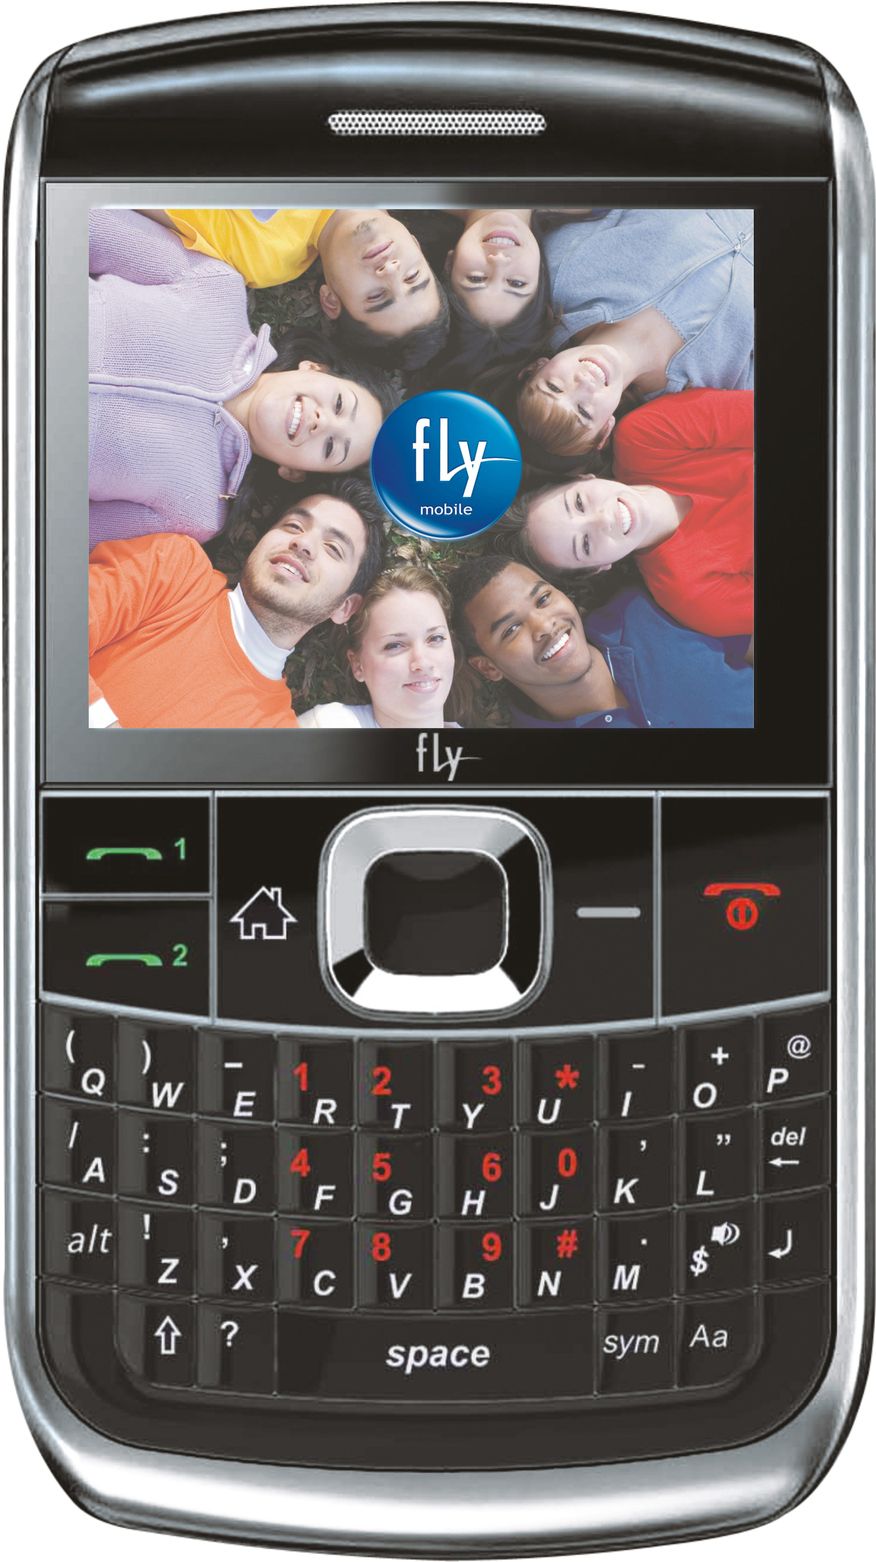 http://telecomtalk.info/wp-content/uploads/2010/01/Fly-Mobile-Launches-Power-Packed-Dual-SIM-Mobile-Phone-at-Rs.3490.jpg